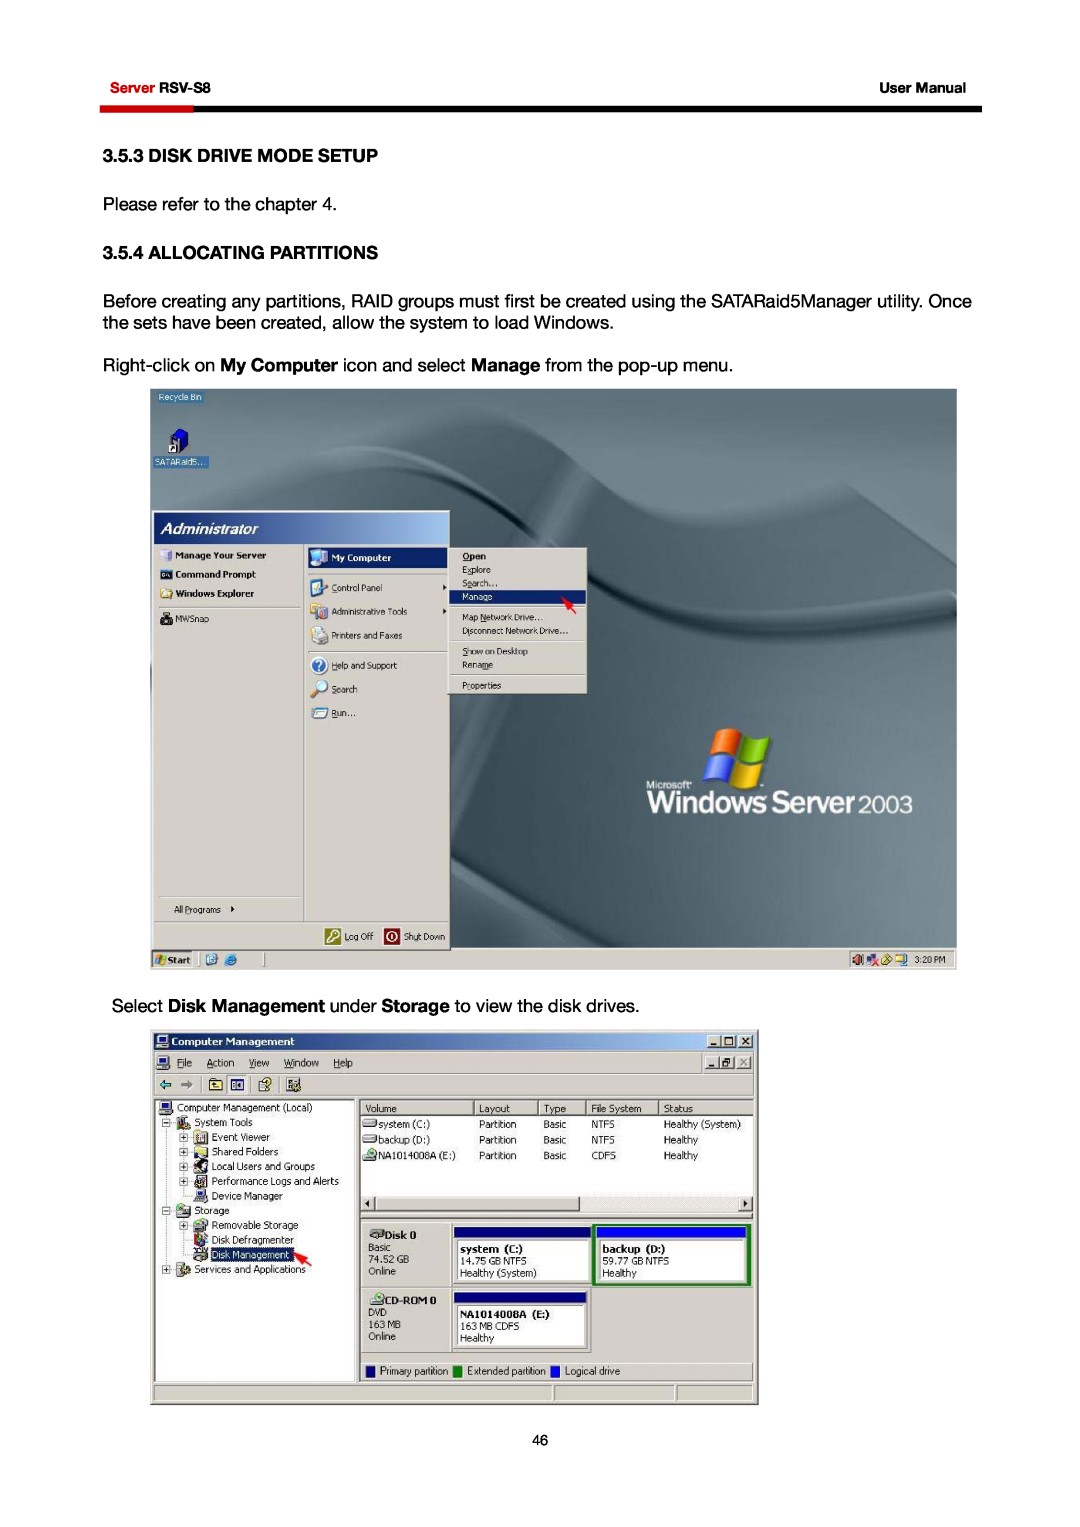 Rosewill RSV-S8 user manual Disk Drive Mode Setup, Allocating Partitions 